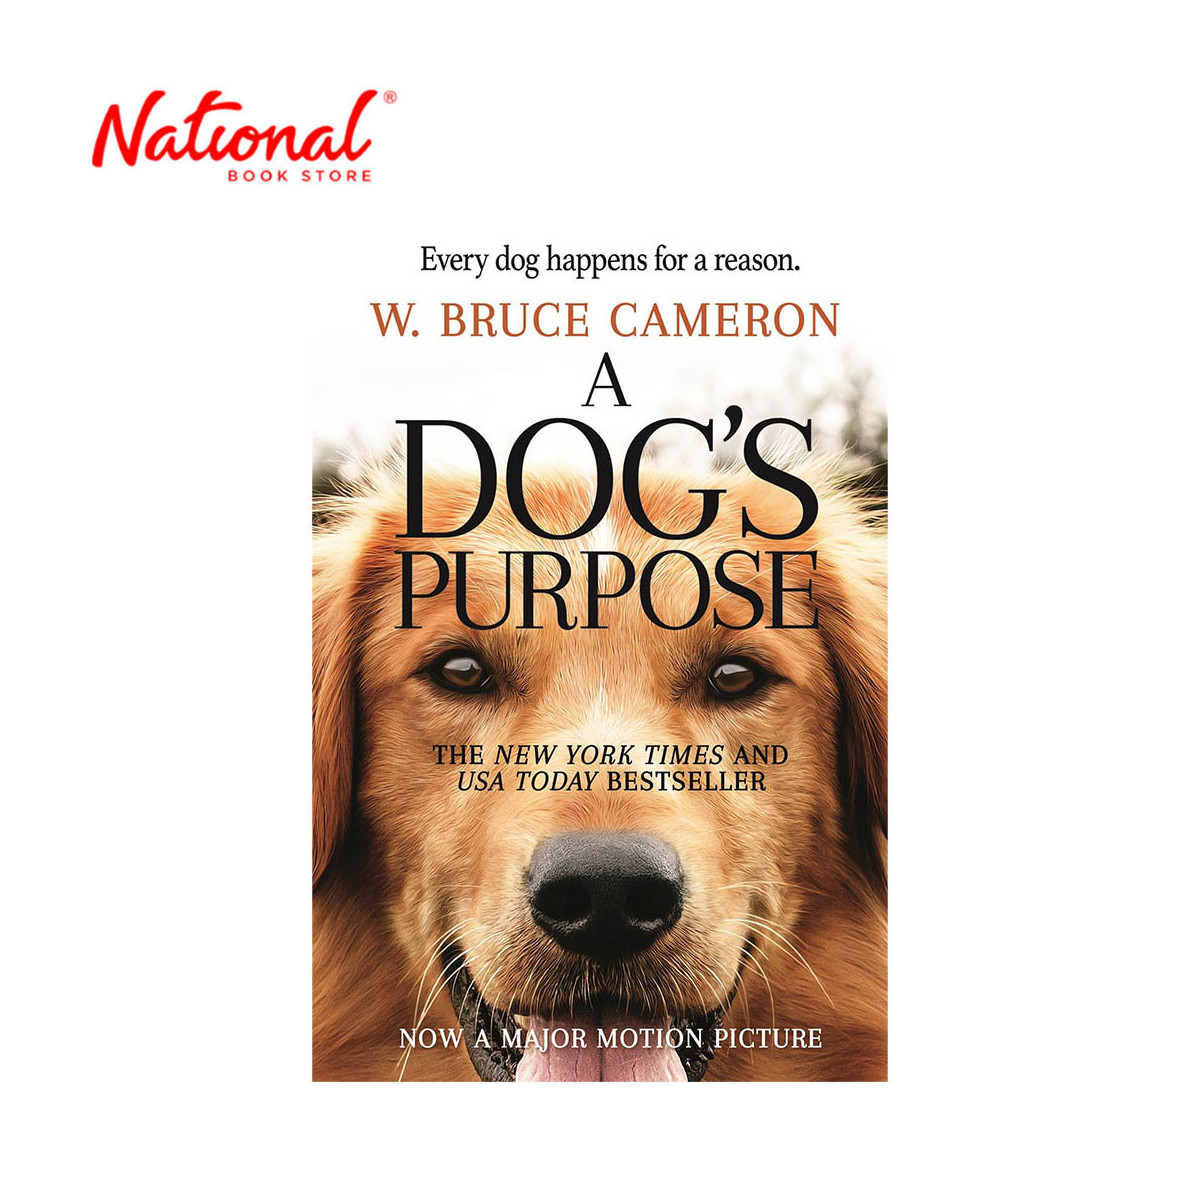 A Dog's Purpose by W. Bruce Cameron - Trade Paperback - Contemporary Fiction